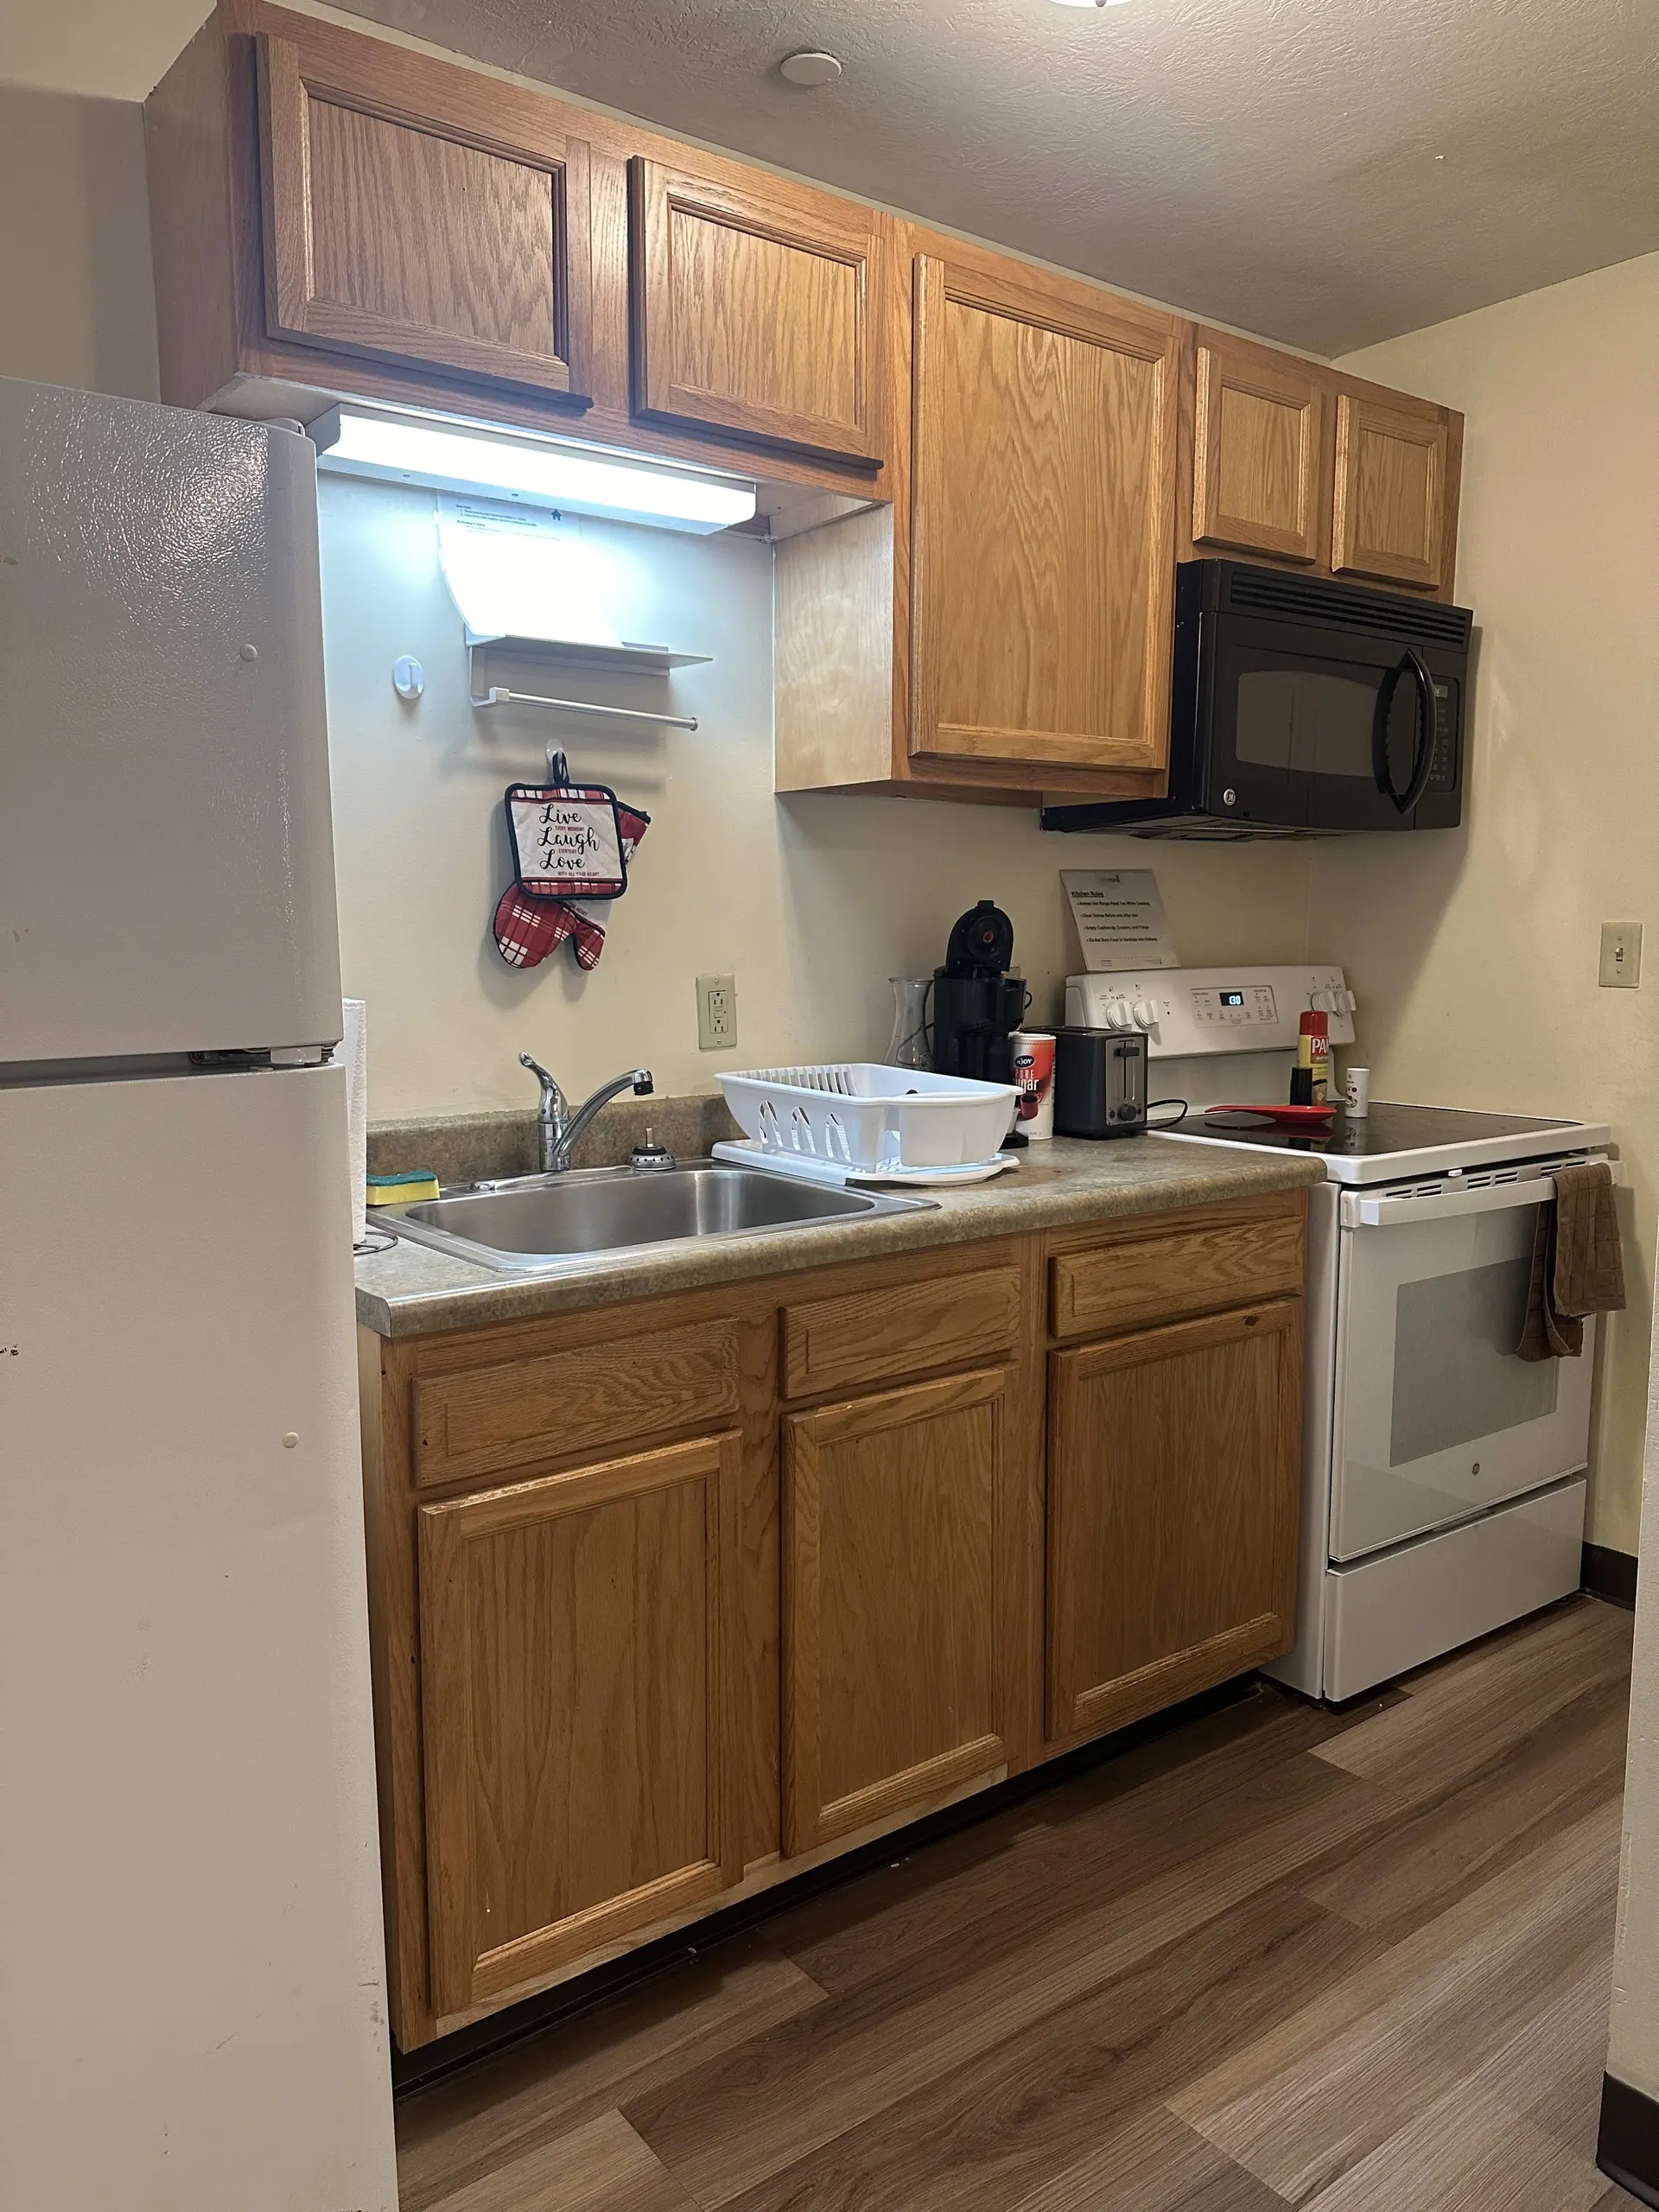 2 Bedroom 2 Bath | Heart of Downtown PGH!